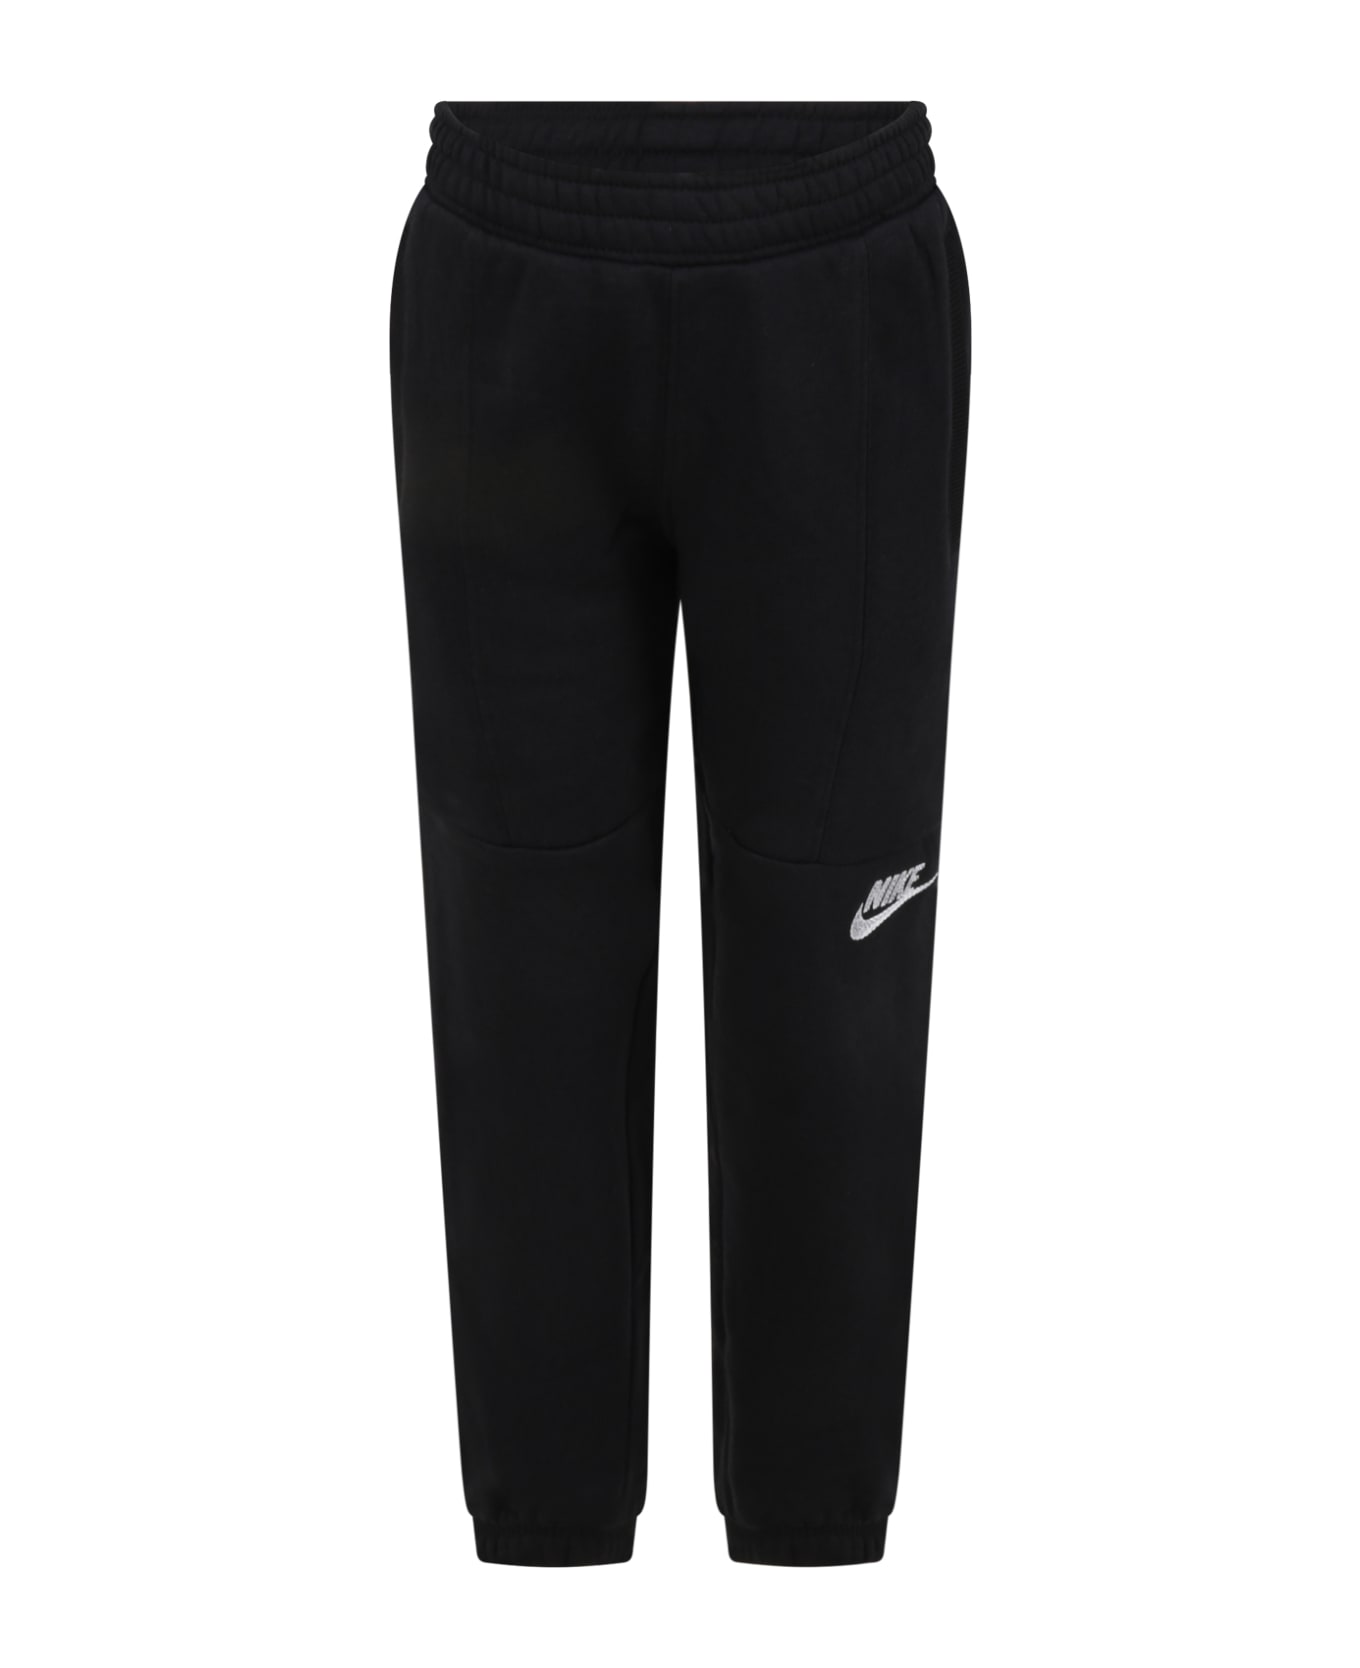 Nike Black Sweatpants For Boy With Double Logo - Black ボトムス